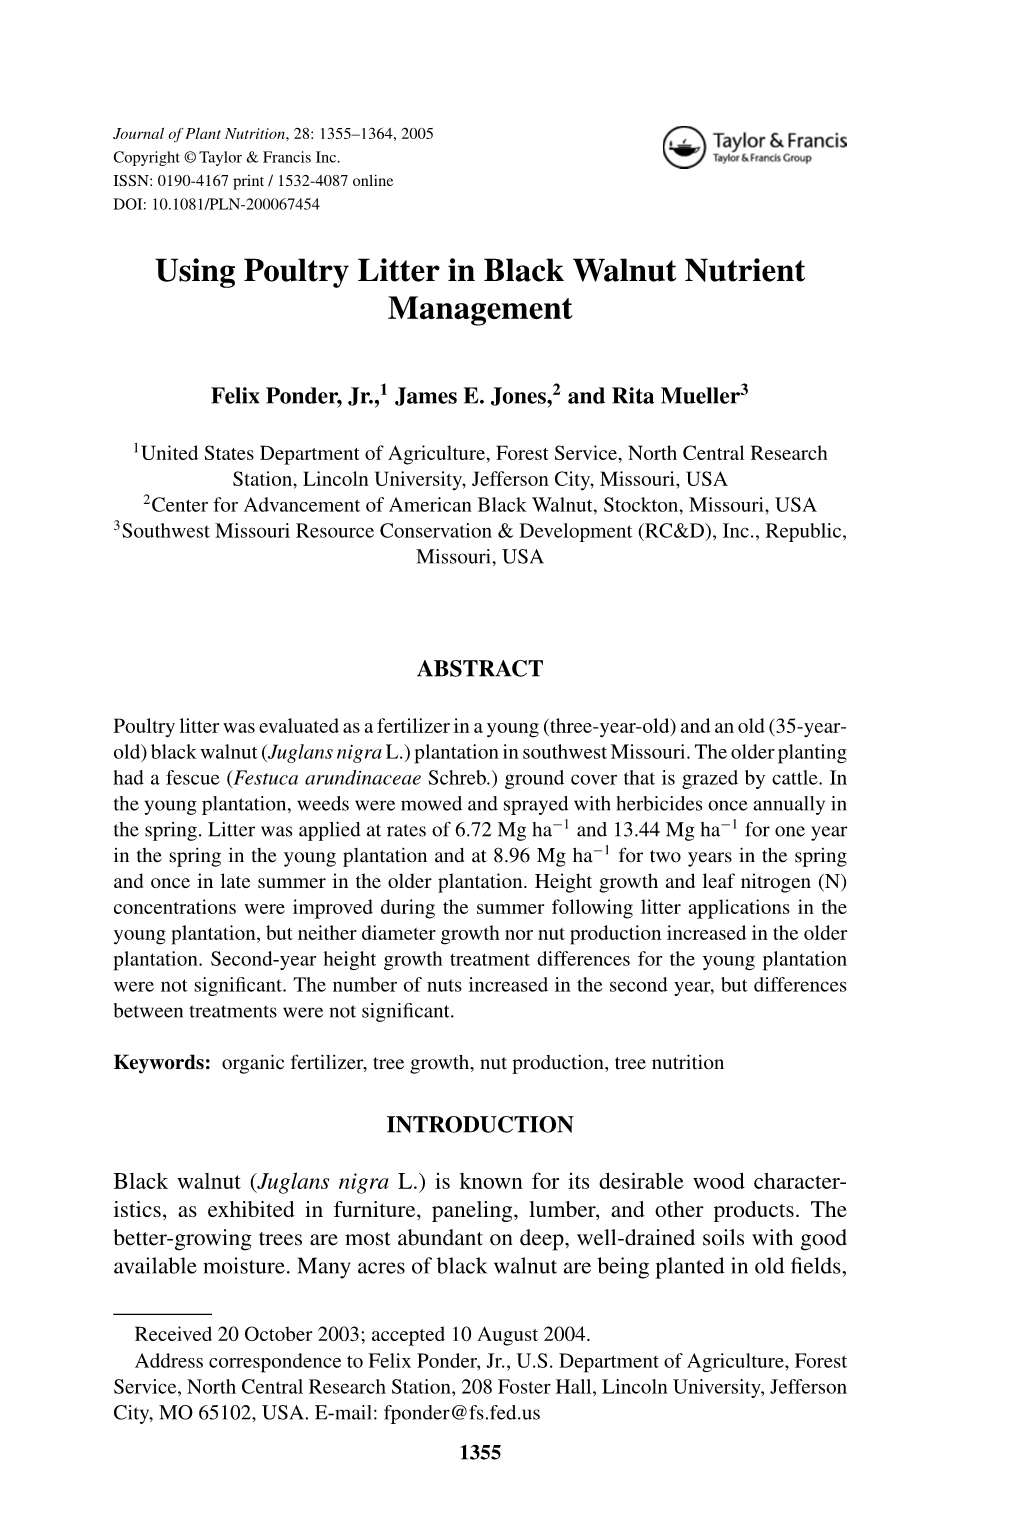 Using Poultry Litter in Black Walnut Nutrient Management